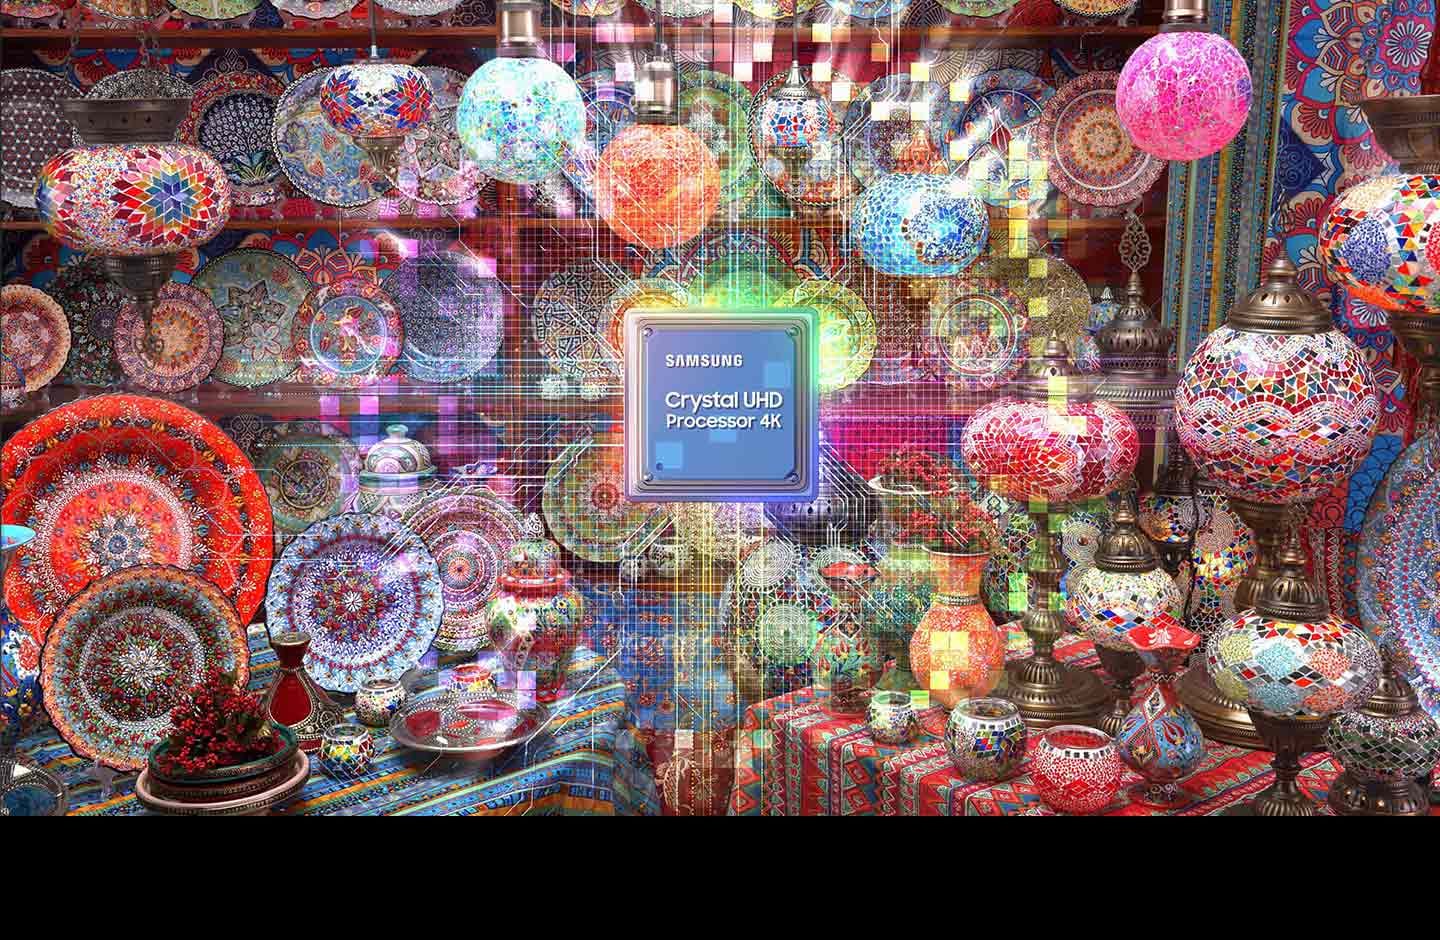 The Samsung Crystal UHD Processor 4K chip is on display in the middle amidst many colorful plates and ornaments.